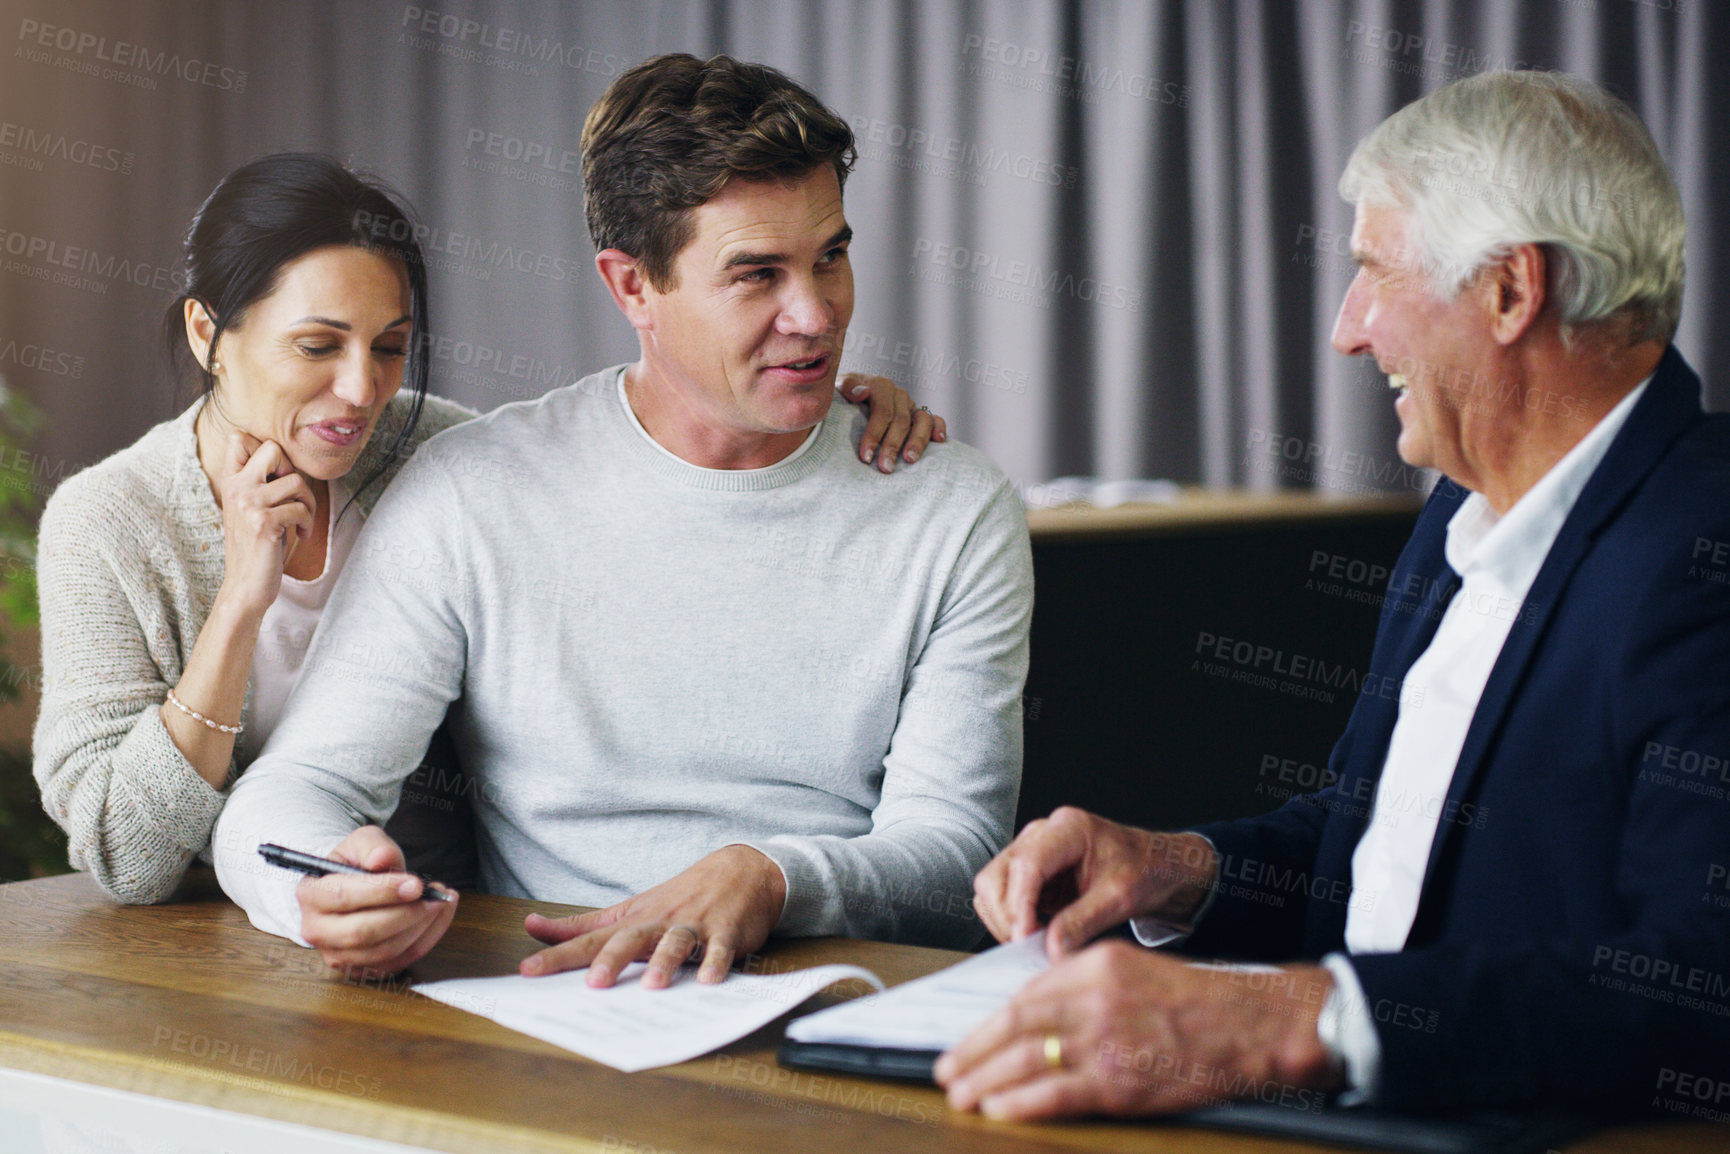 Buy stock photo Shot of a young couple meeting meeting with a mature consultant